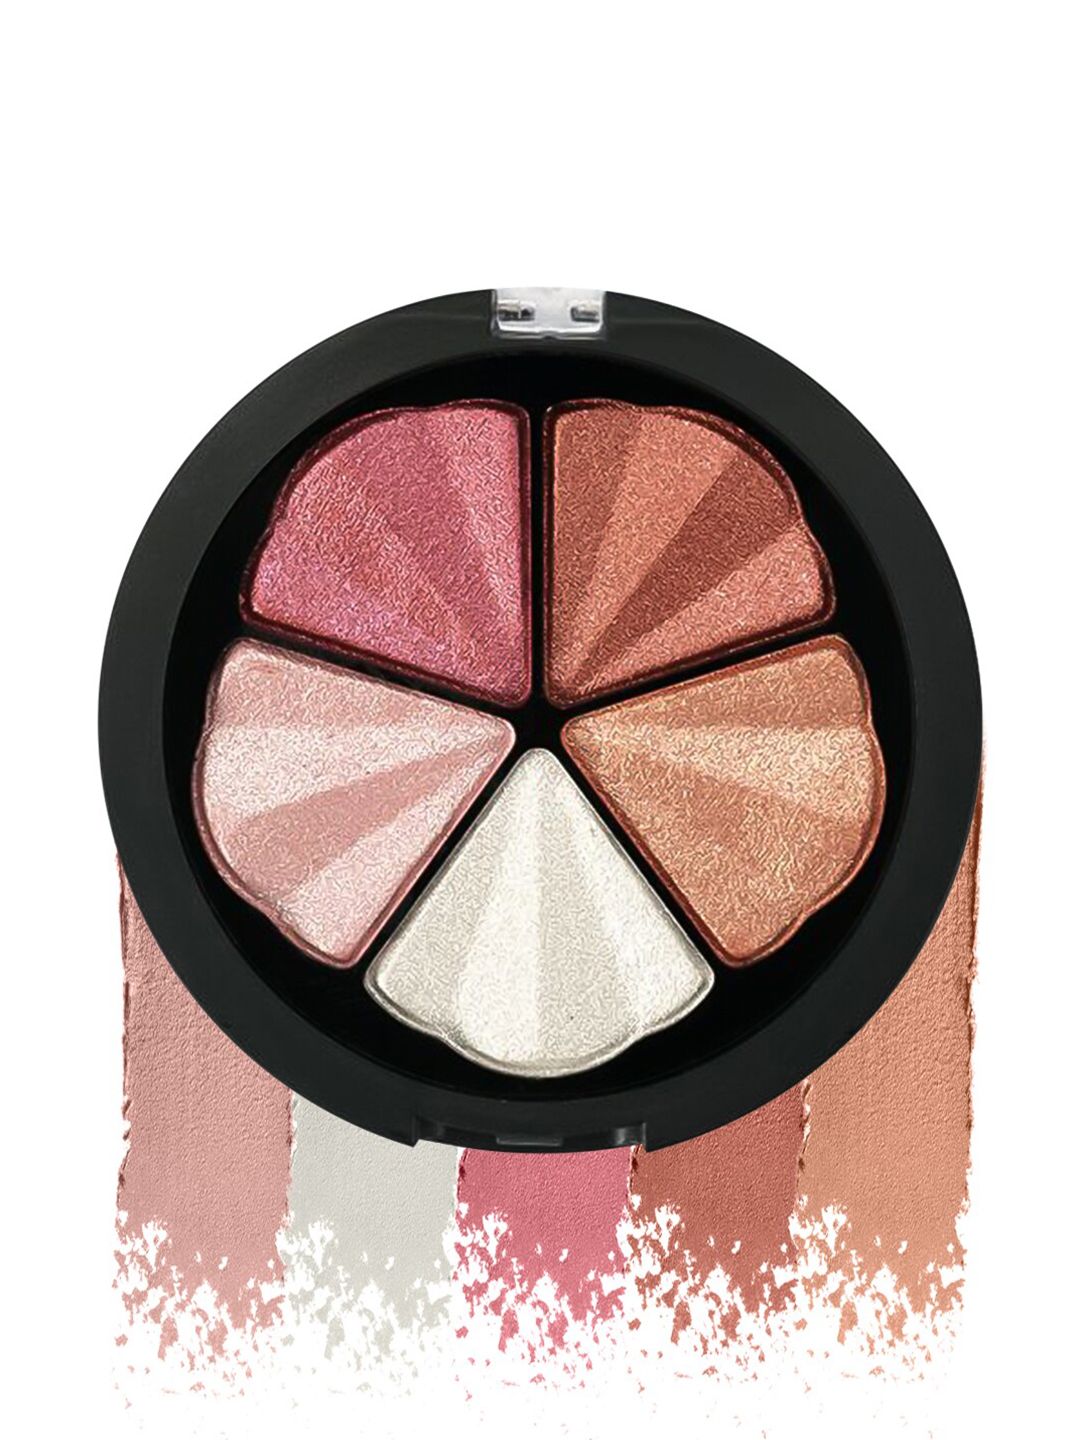 MISS ROSE Transparent Glitter & Matte 5 Color Eyeshadow Palette 7001-016 04 Price in India